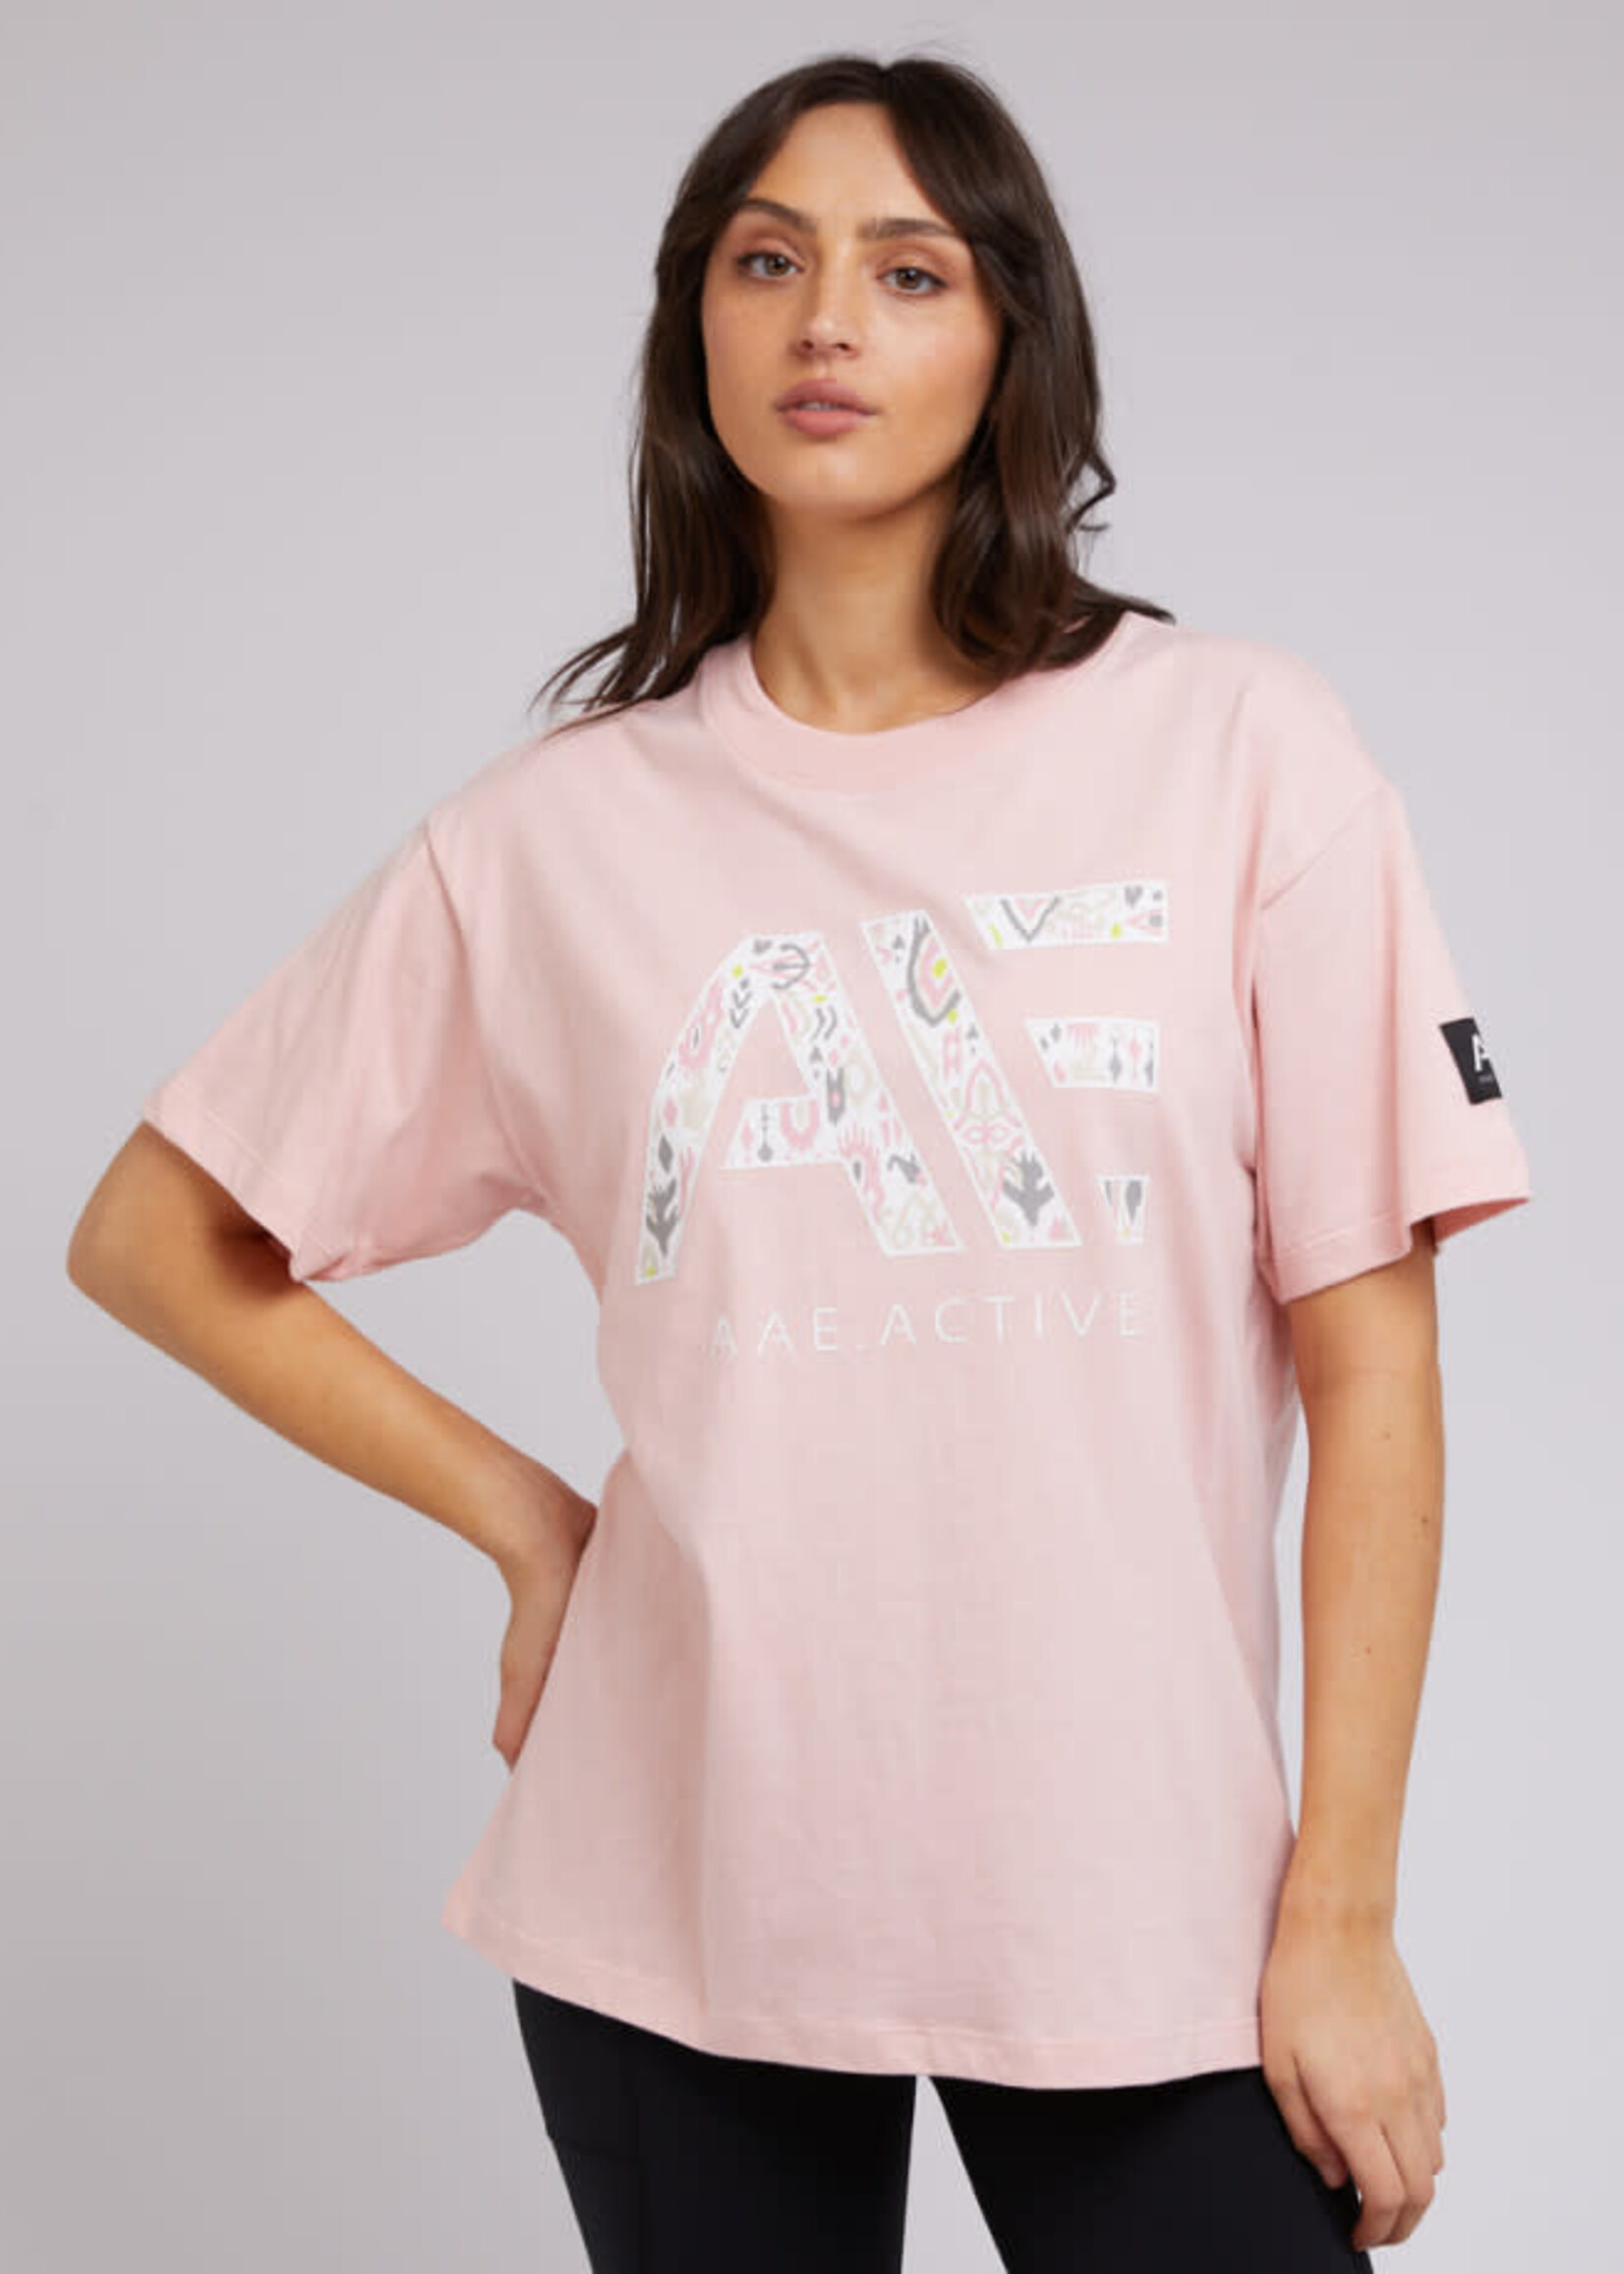 All About Eve Base Active Tee Pink